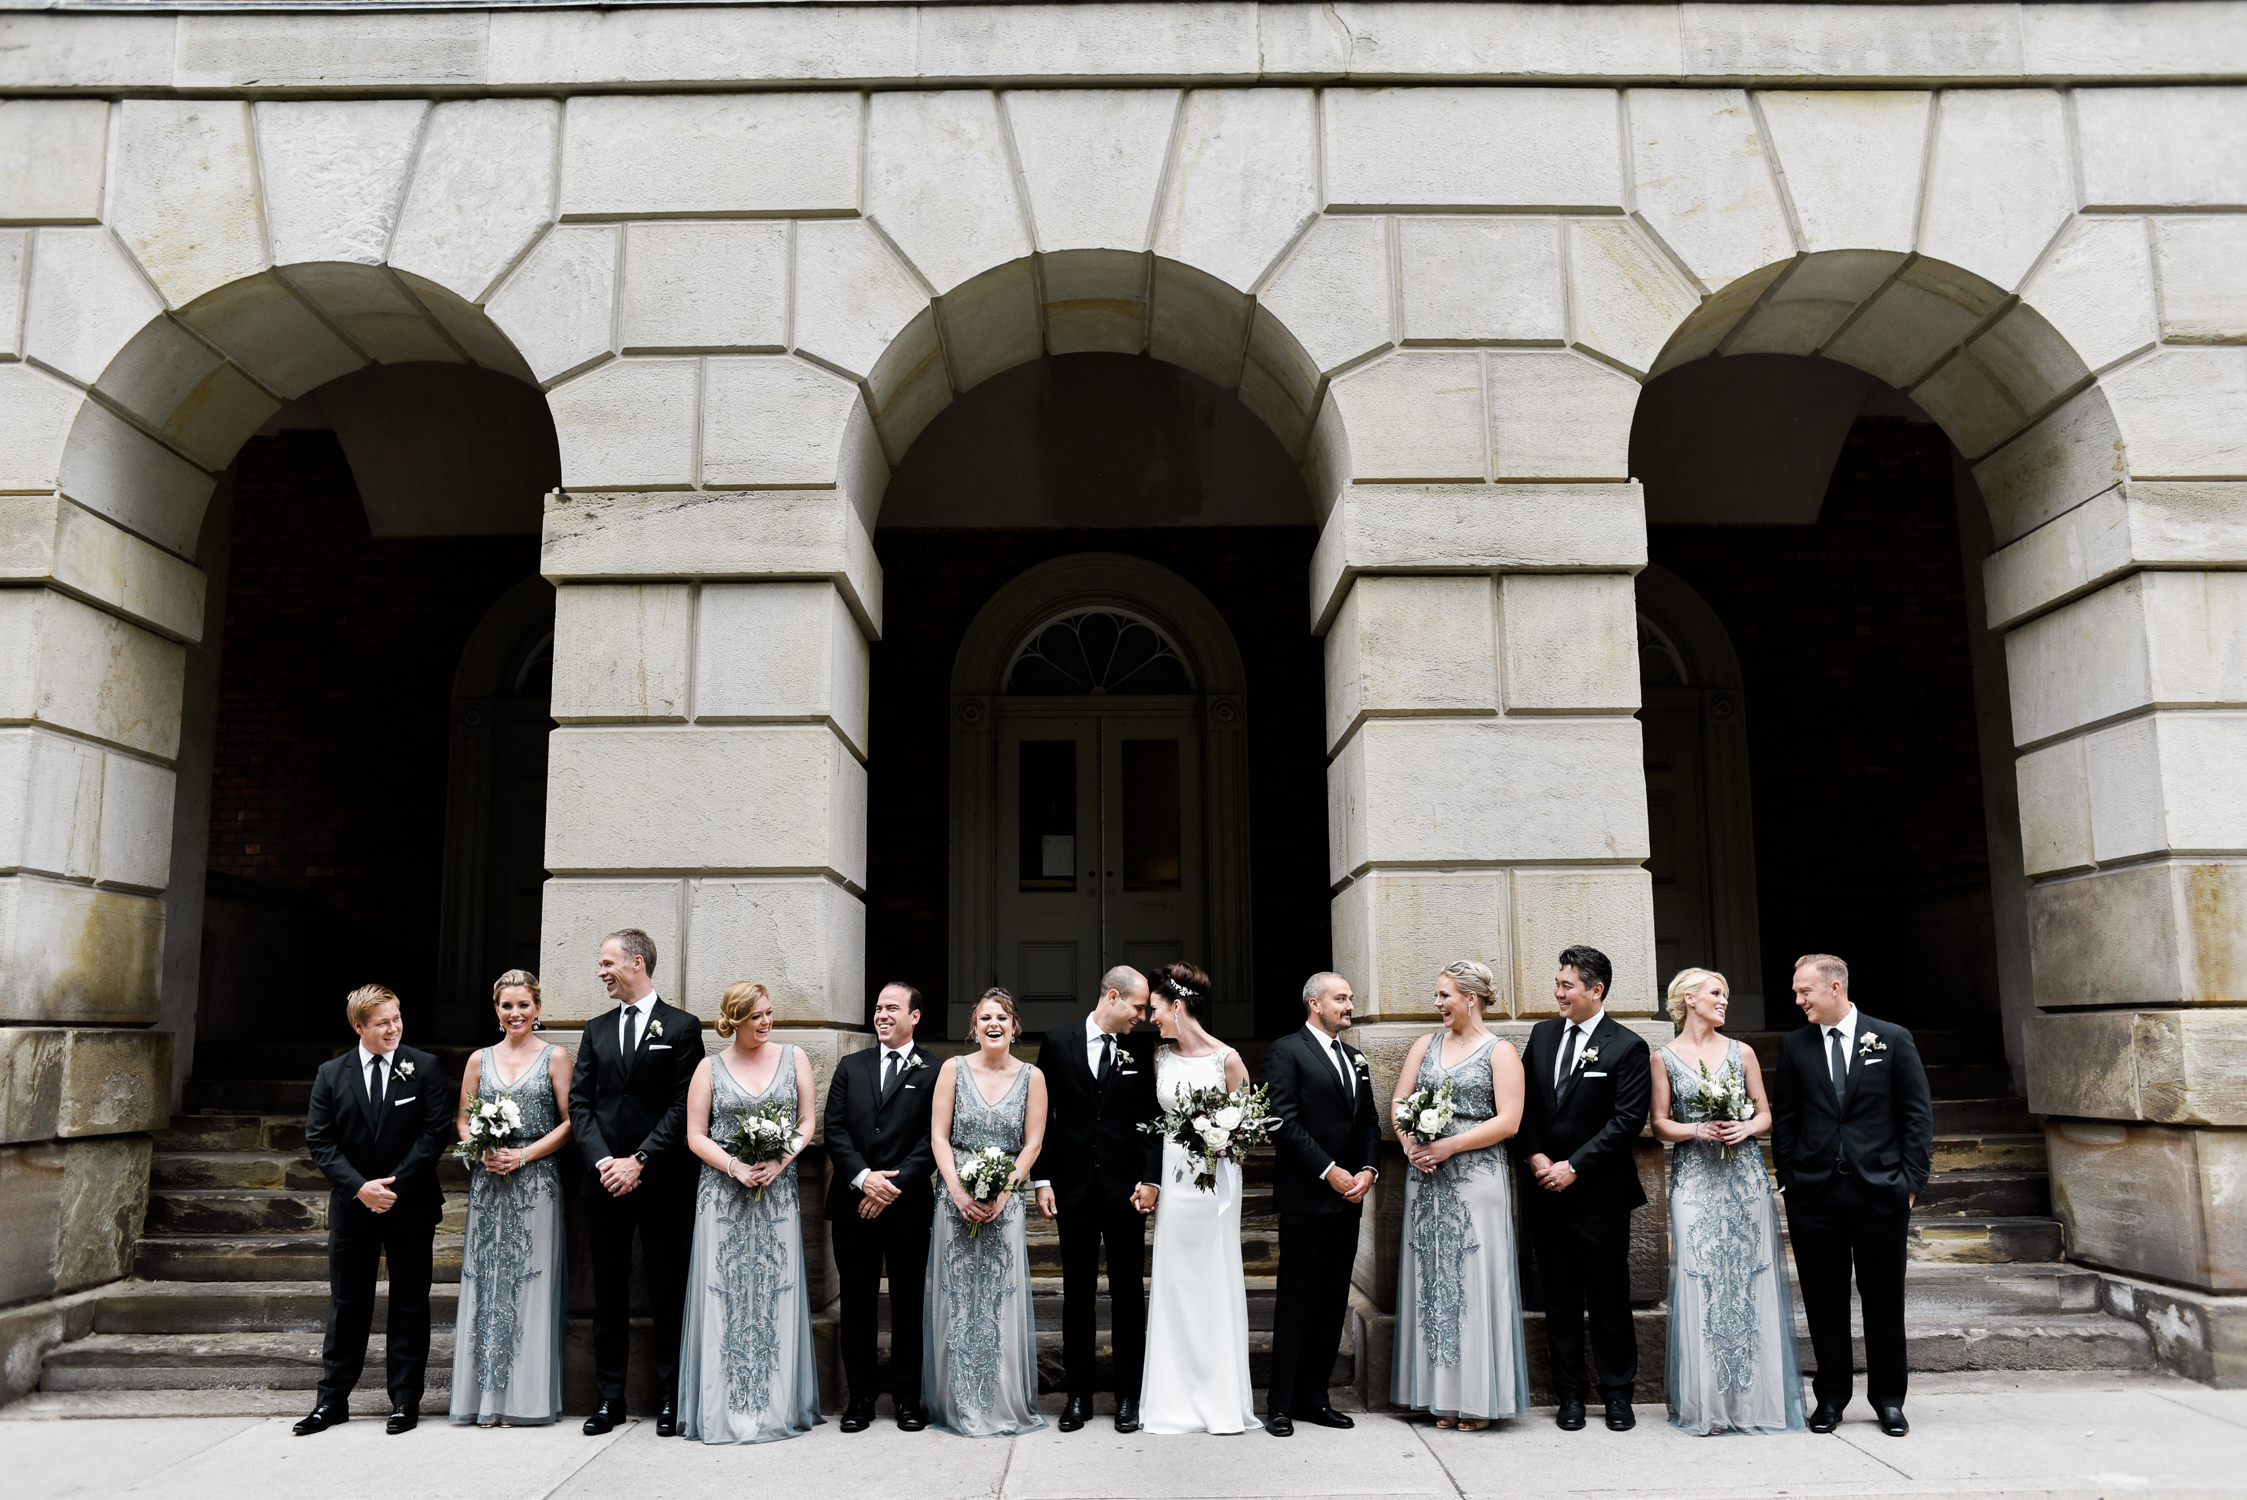 wedding party photo with architecture